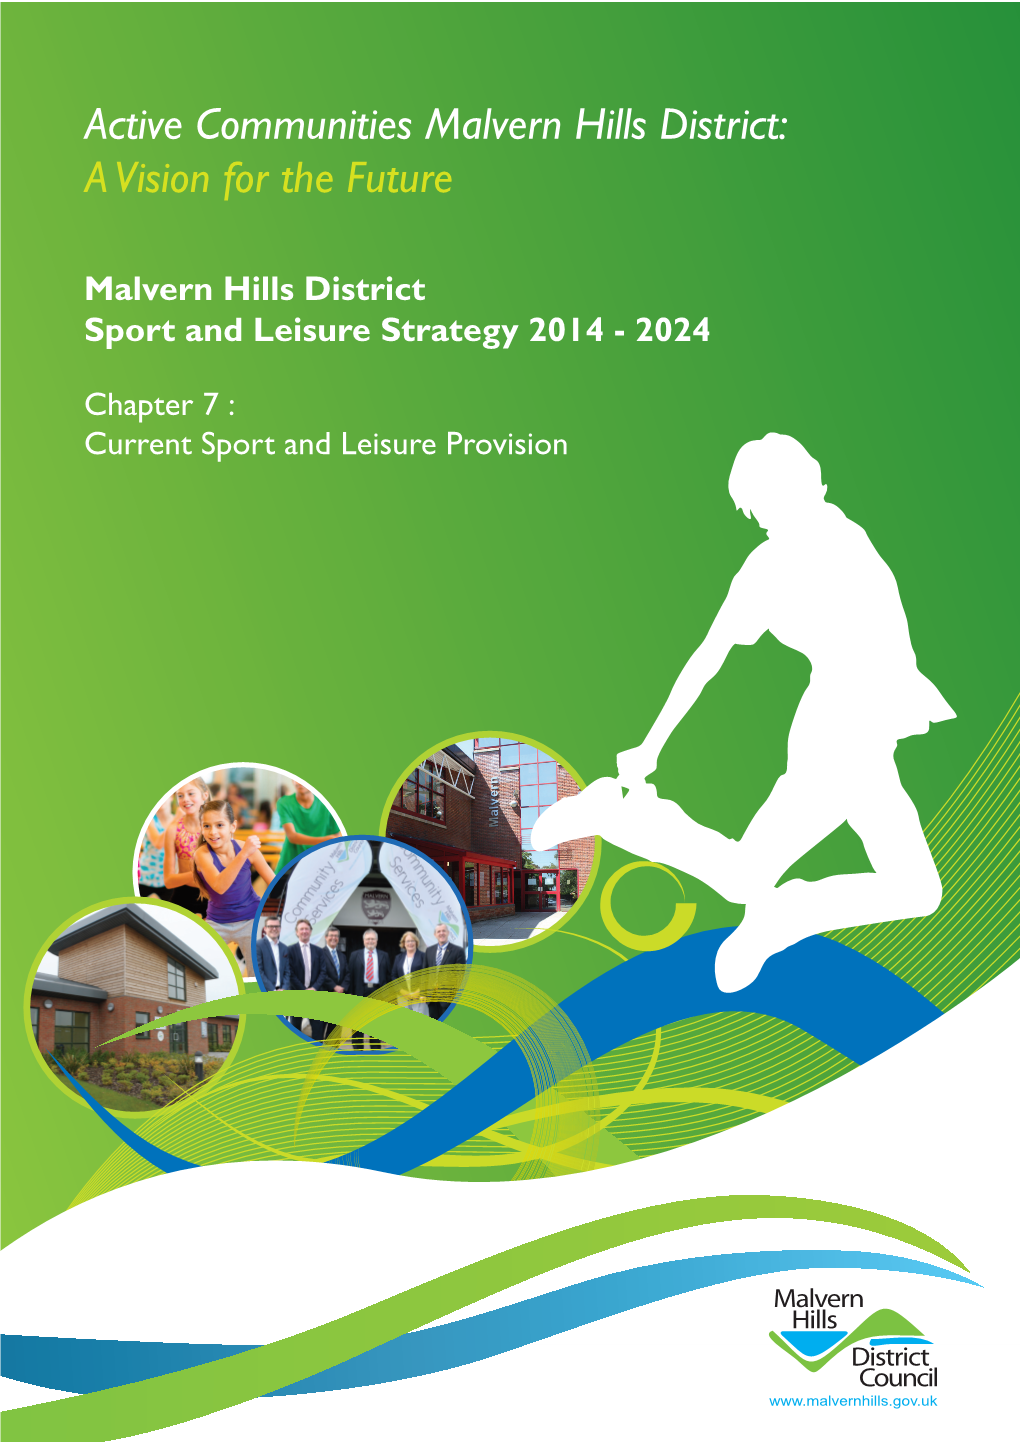 Active Communities Malvern Hills District: a Vision for the Future